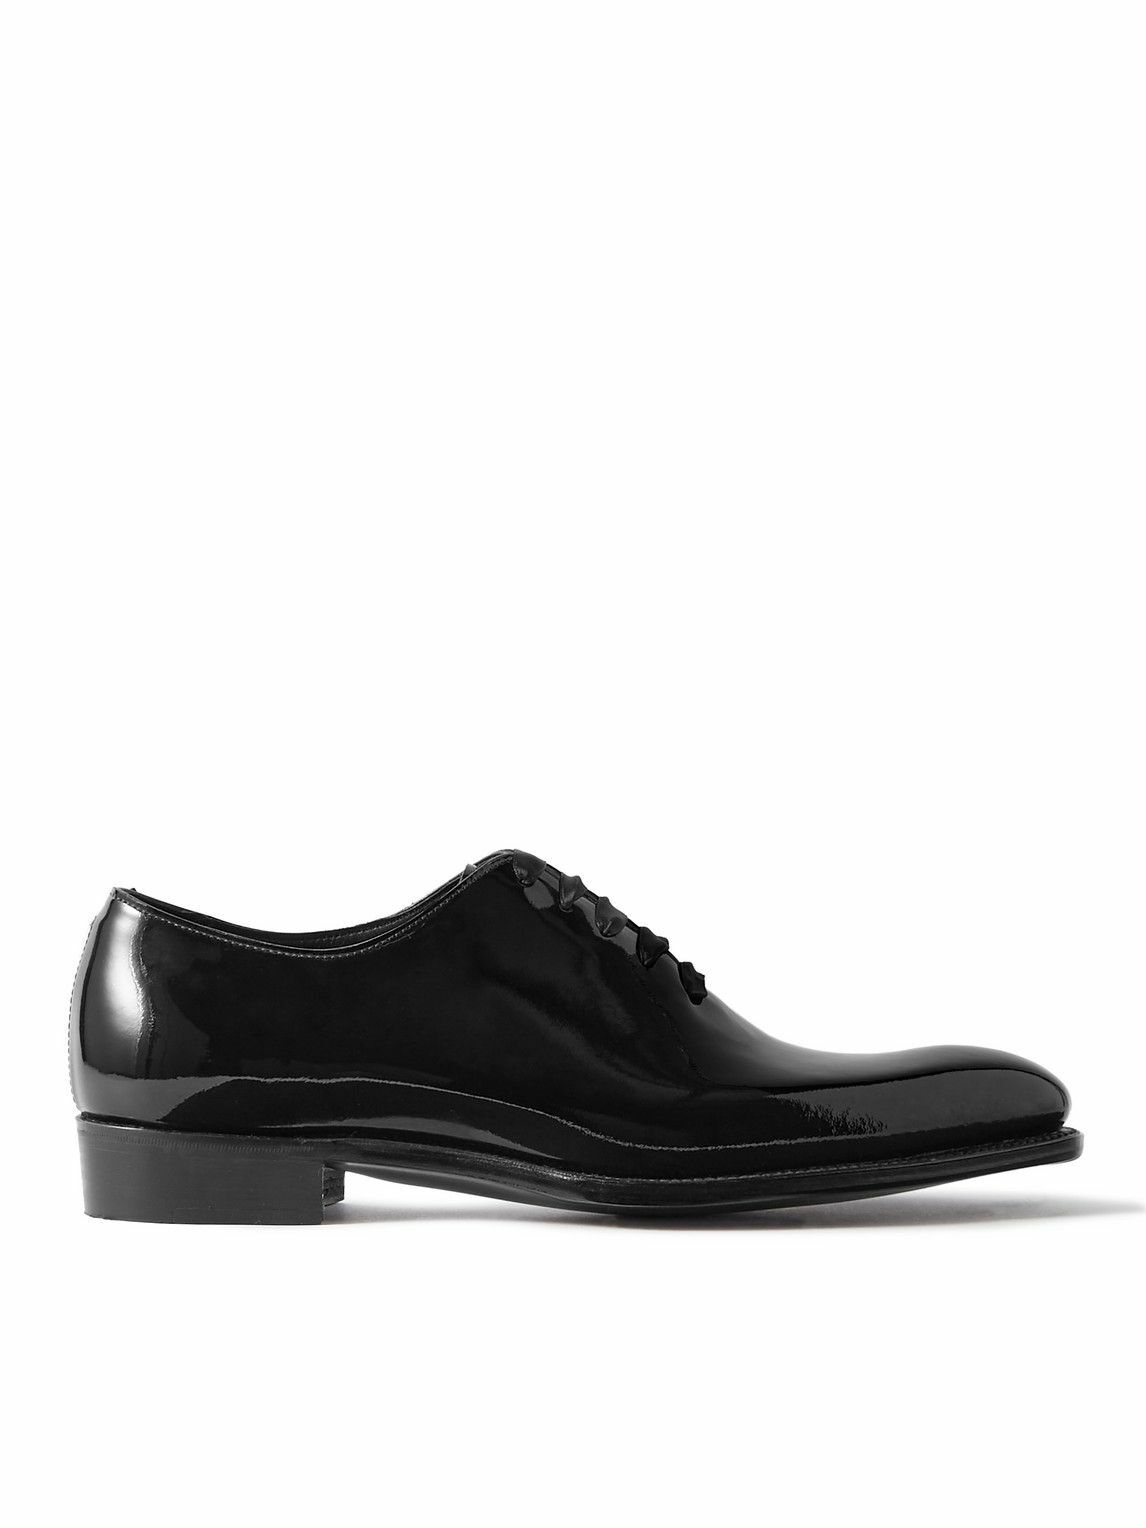 George Cleverley - Merlin Whole-Cut Patent-Leather Oxford Shoes - Black ...